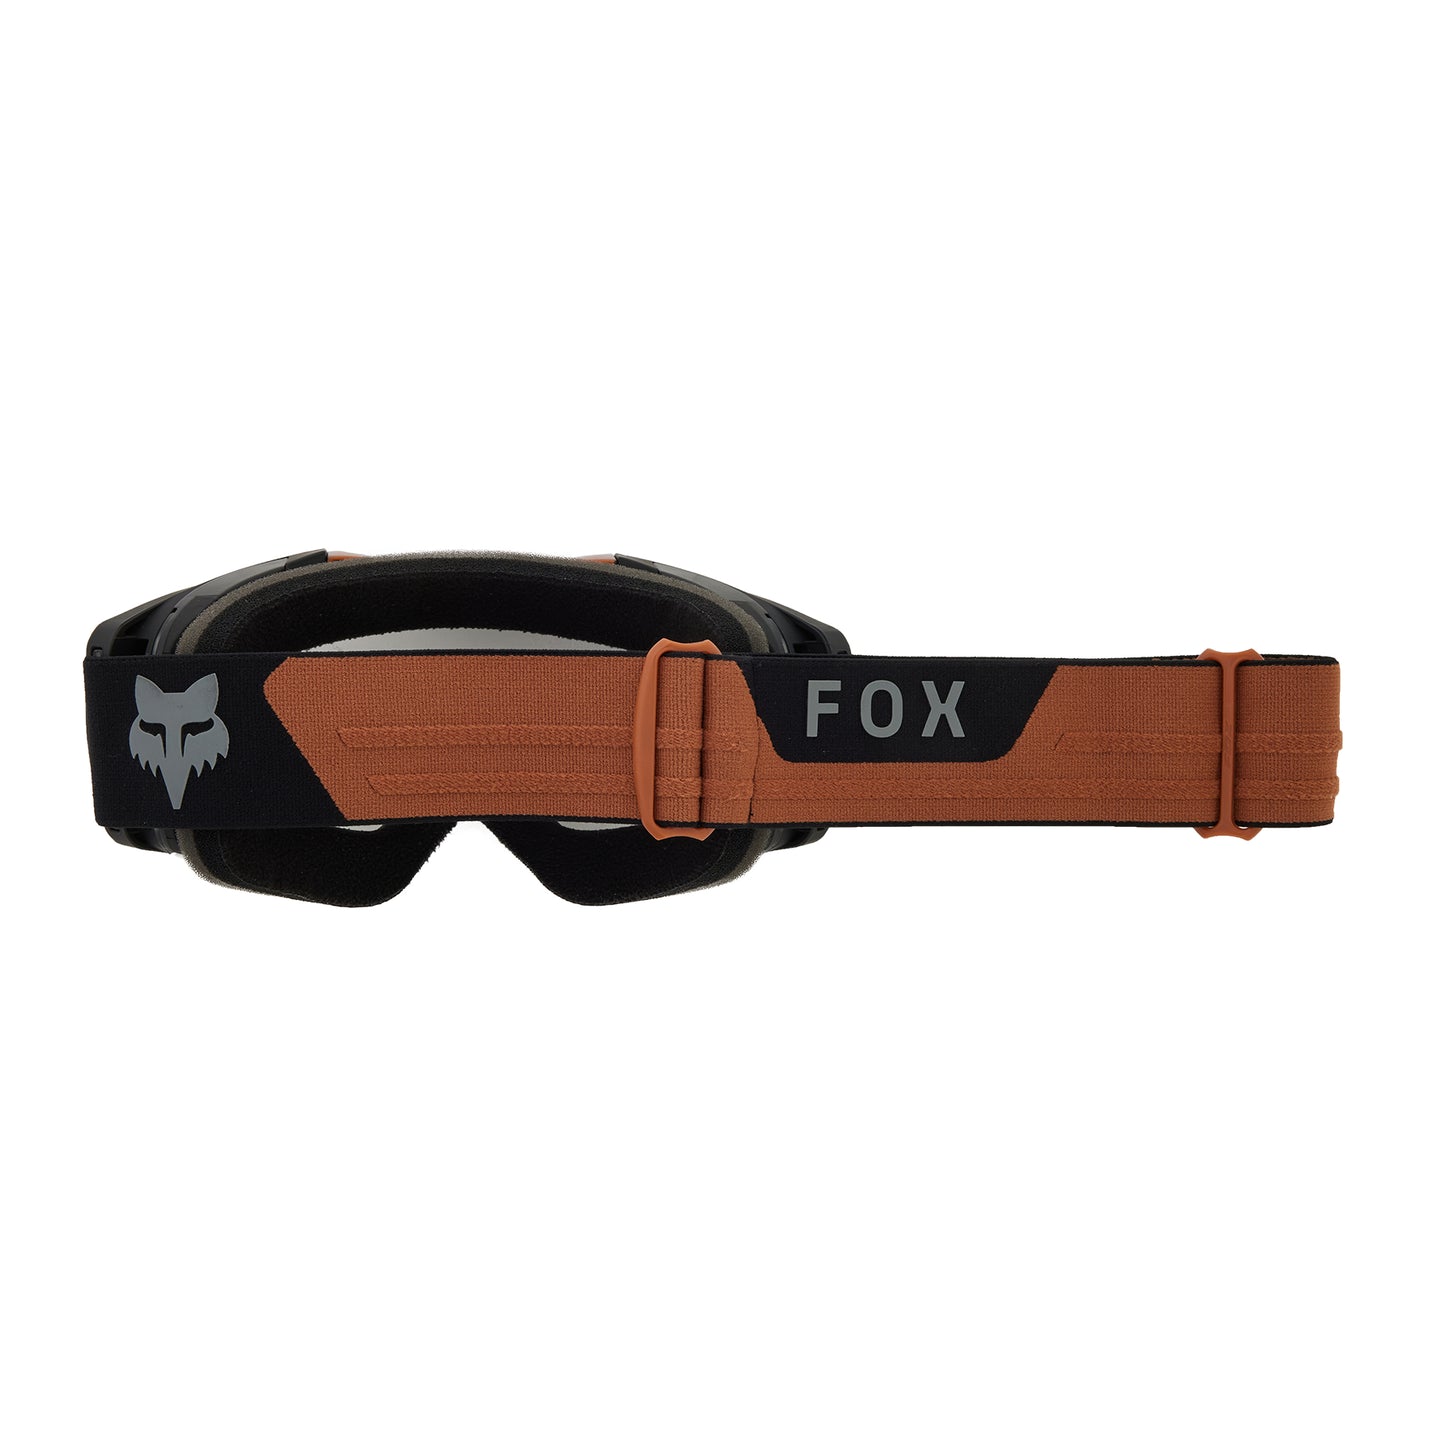 Fox Vue Core Goggles - One Size Fits Most - Taupe - Dark Grey Lens - Image 2